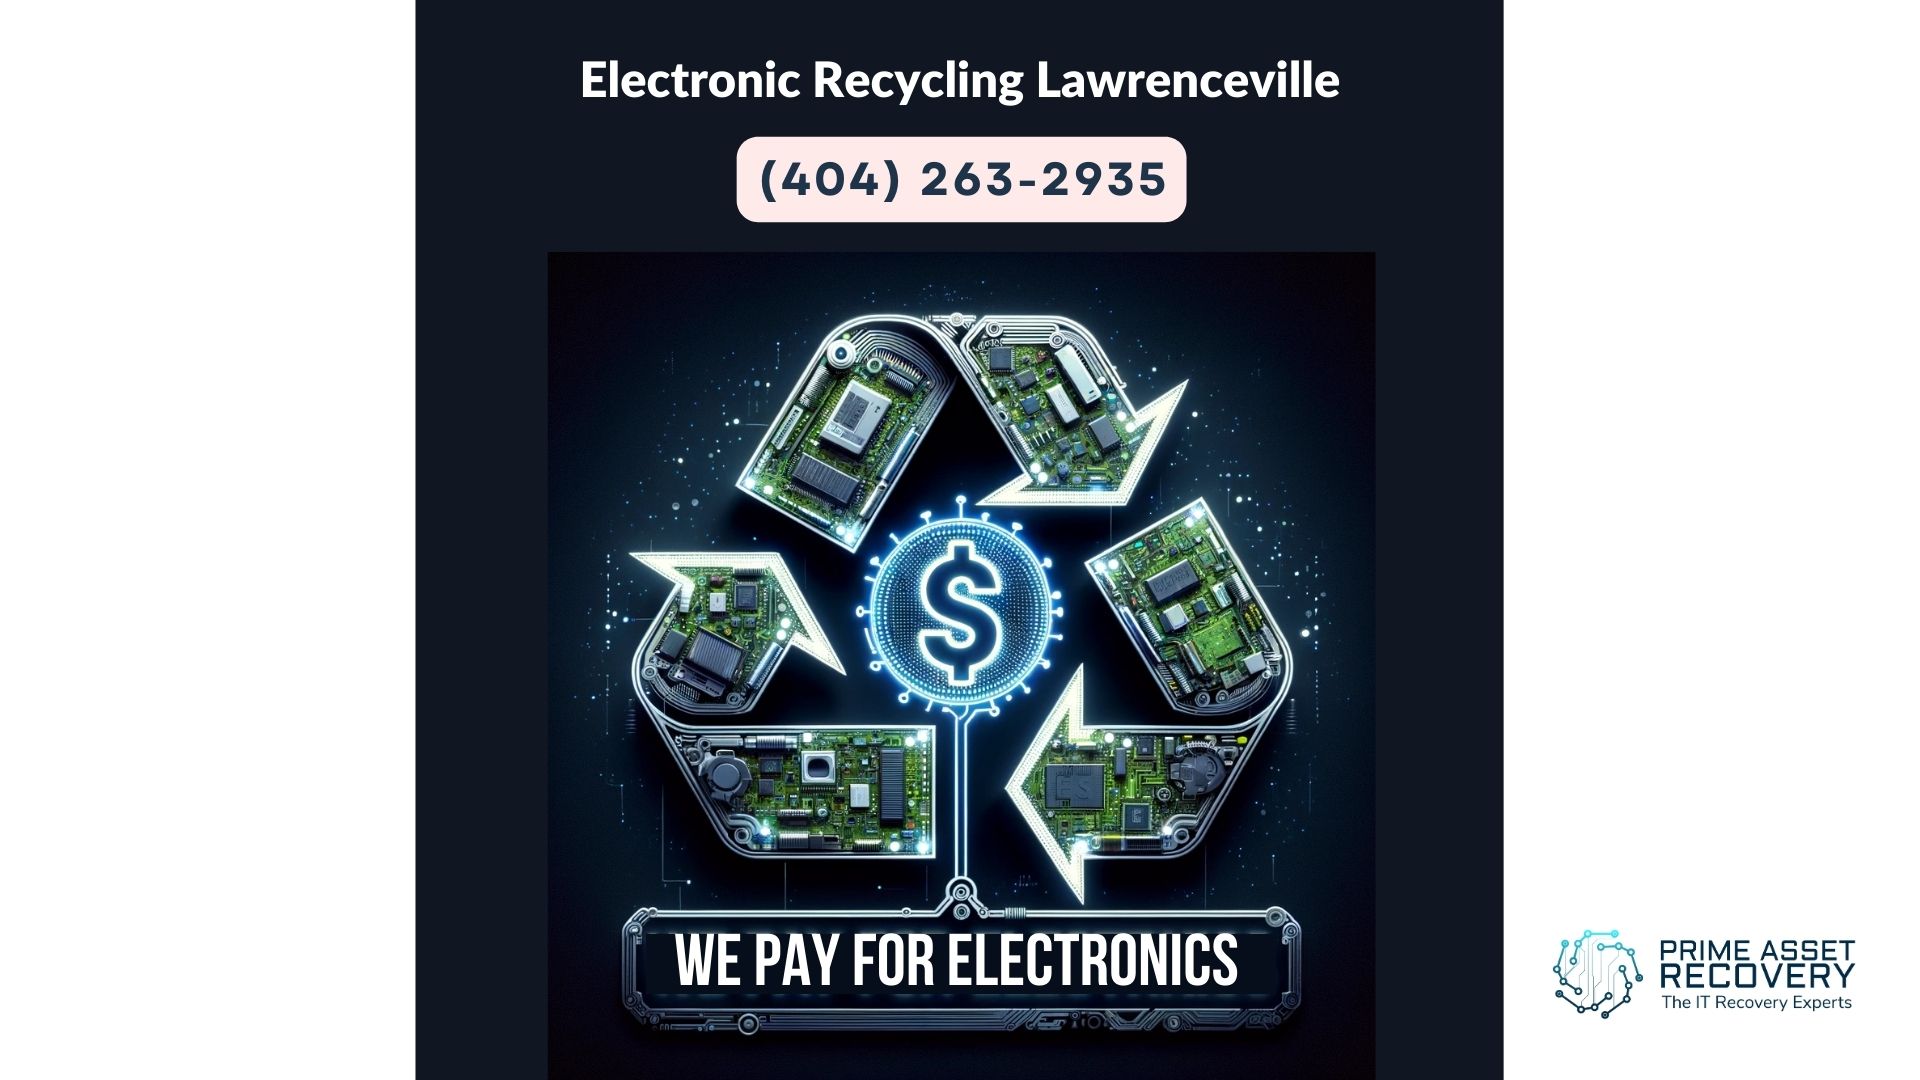 Computer Electronic Recycling Lawrenceville - Prime Asset Recovery Your Partner in Responsible Electronics Recycling